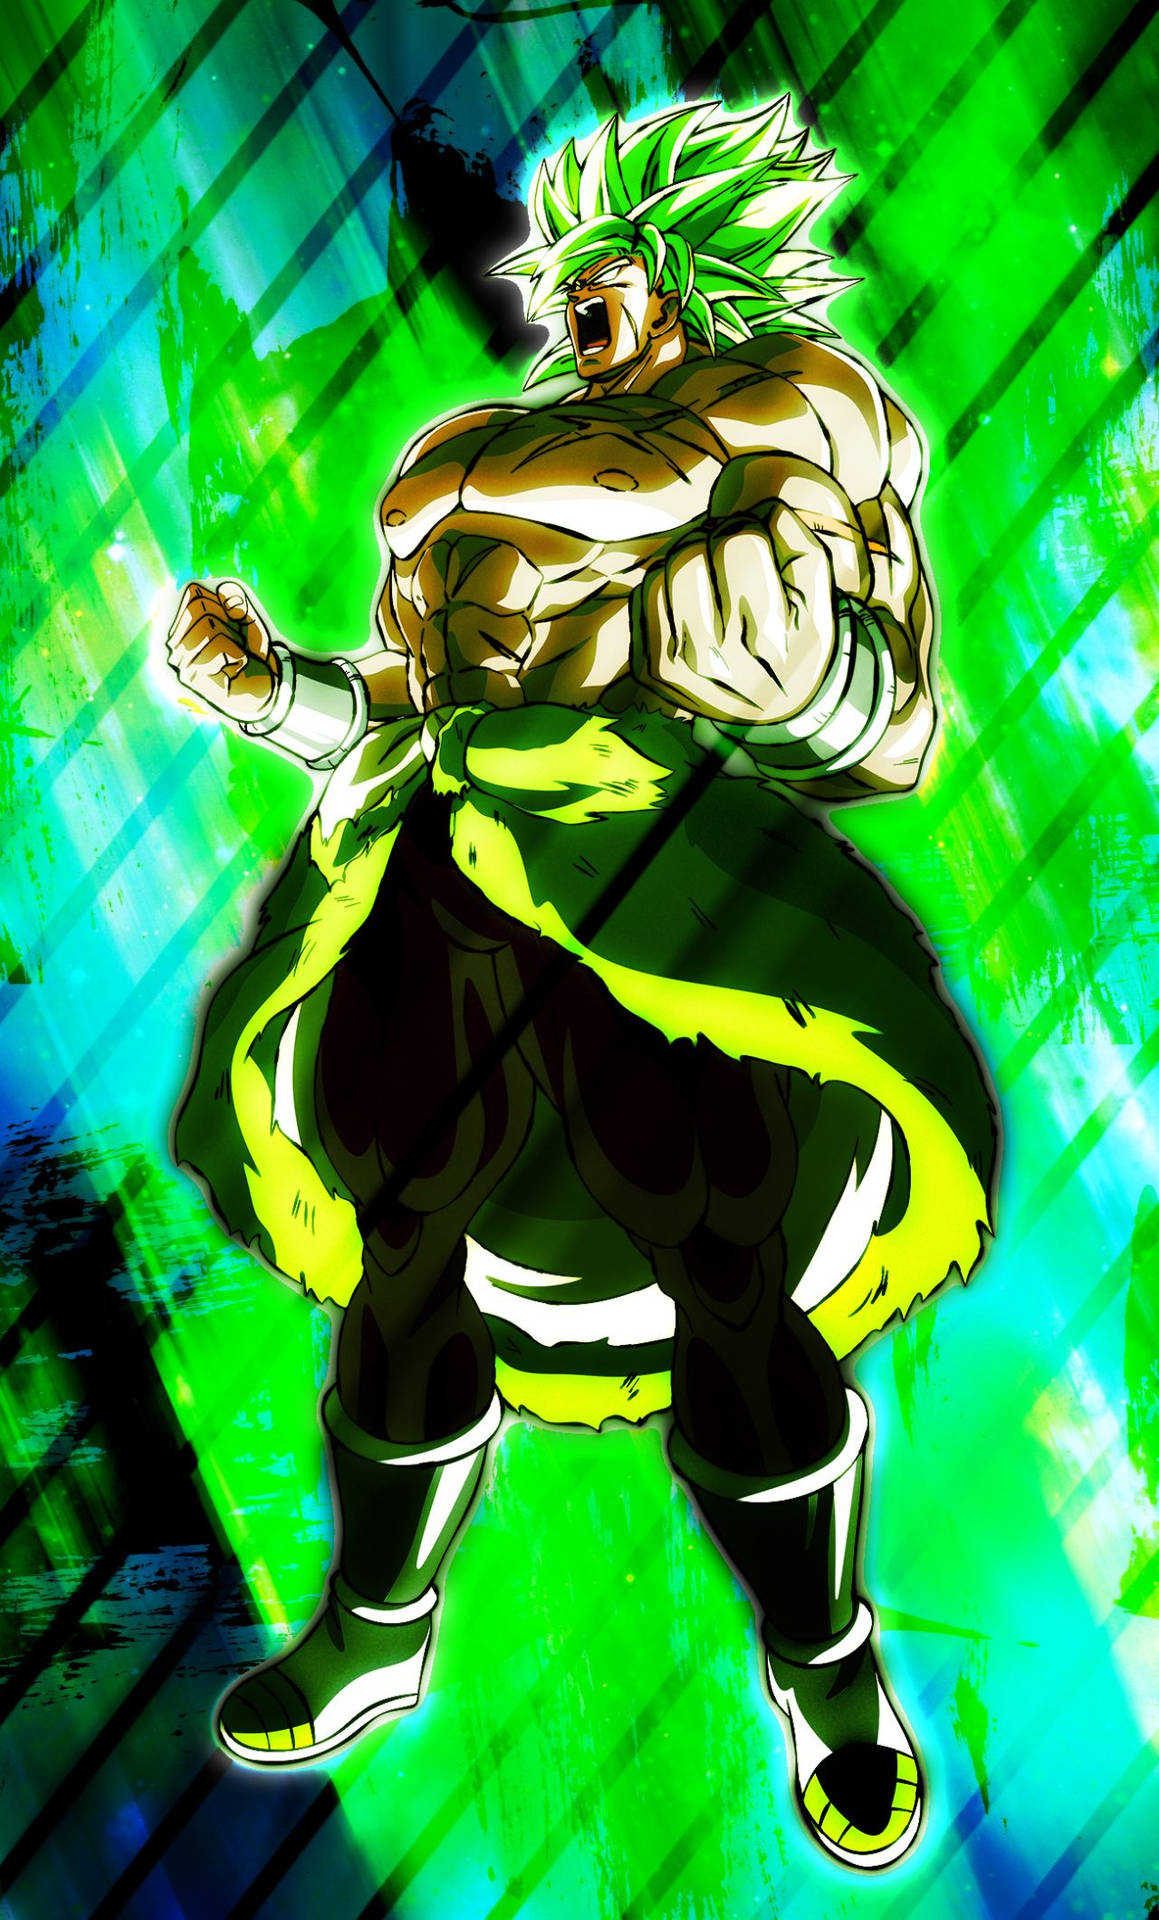 Broly Power Charge Wallpaper